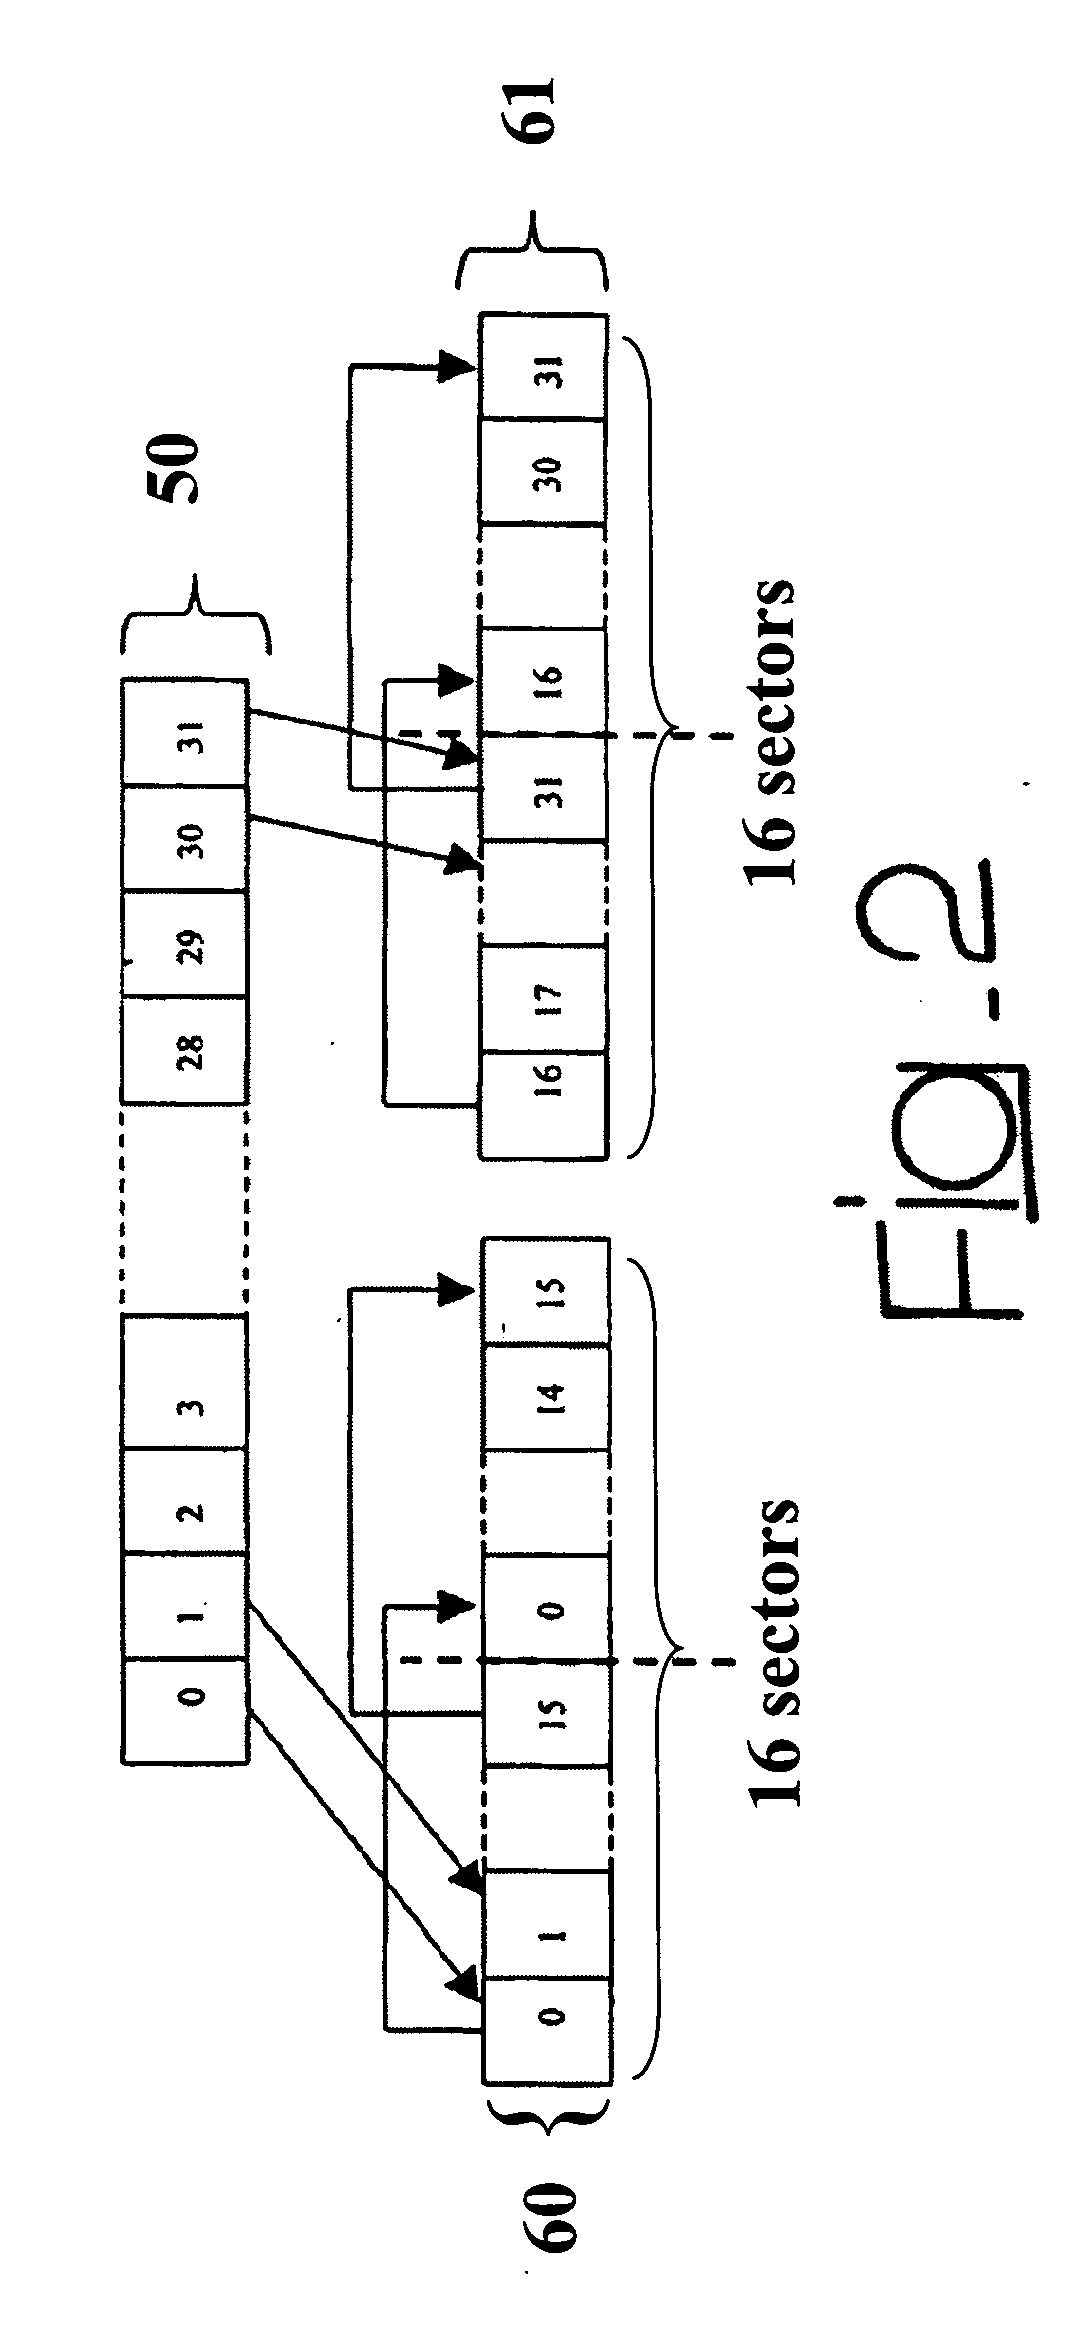 Controlling operation of flash memories